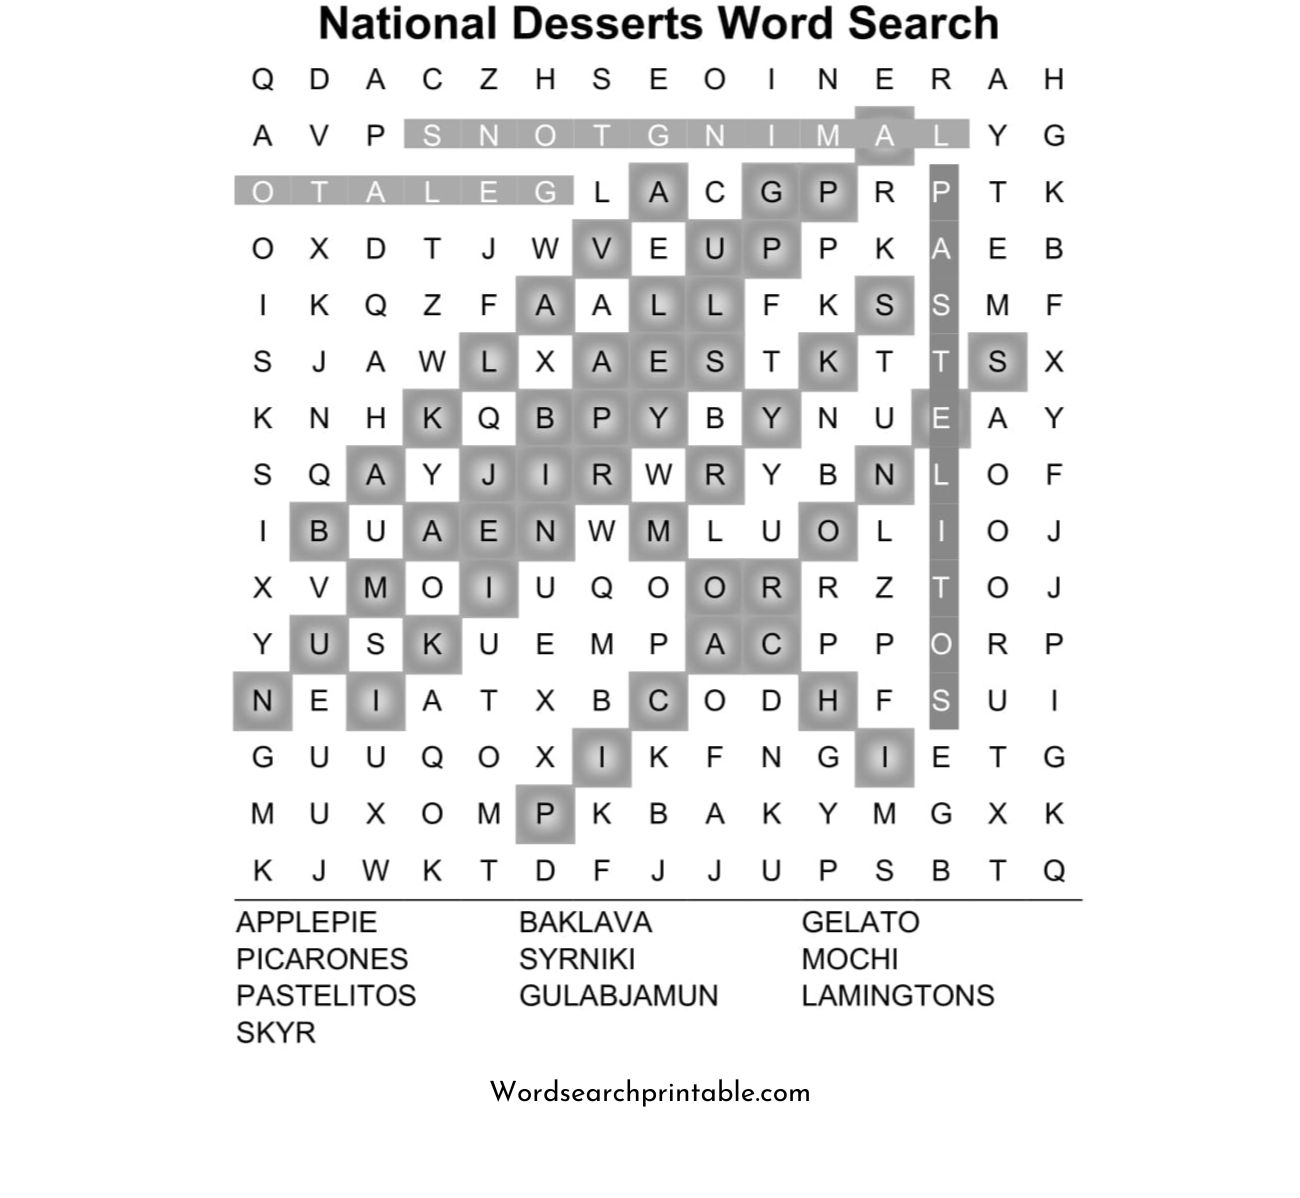 national desserts word search puzzle solution